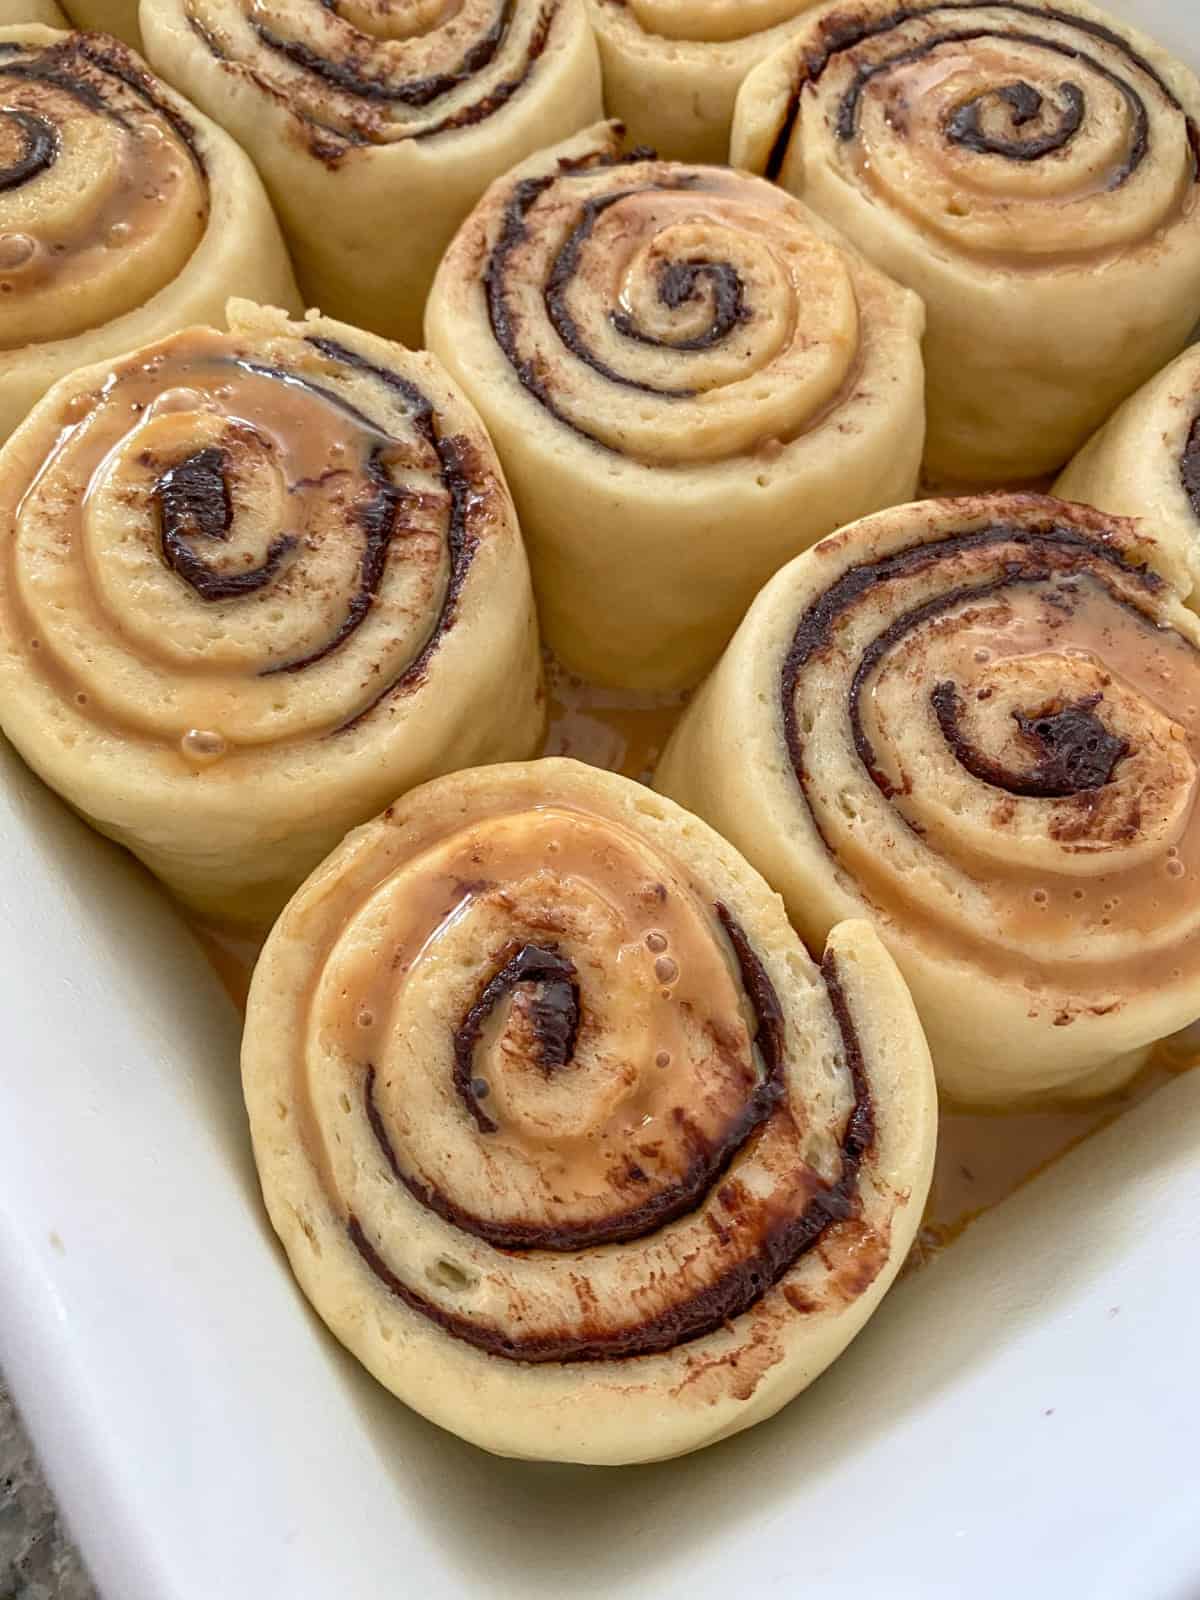 Unbaked chocolate and dulce de leche rolls.